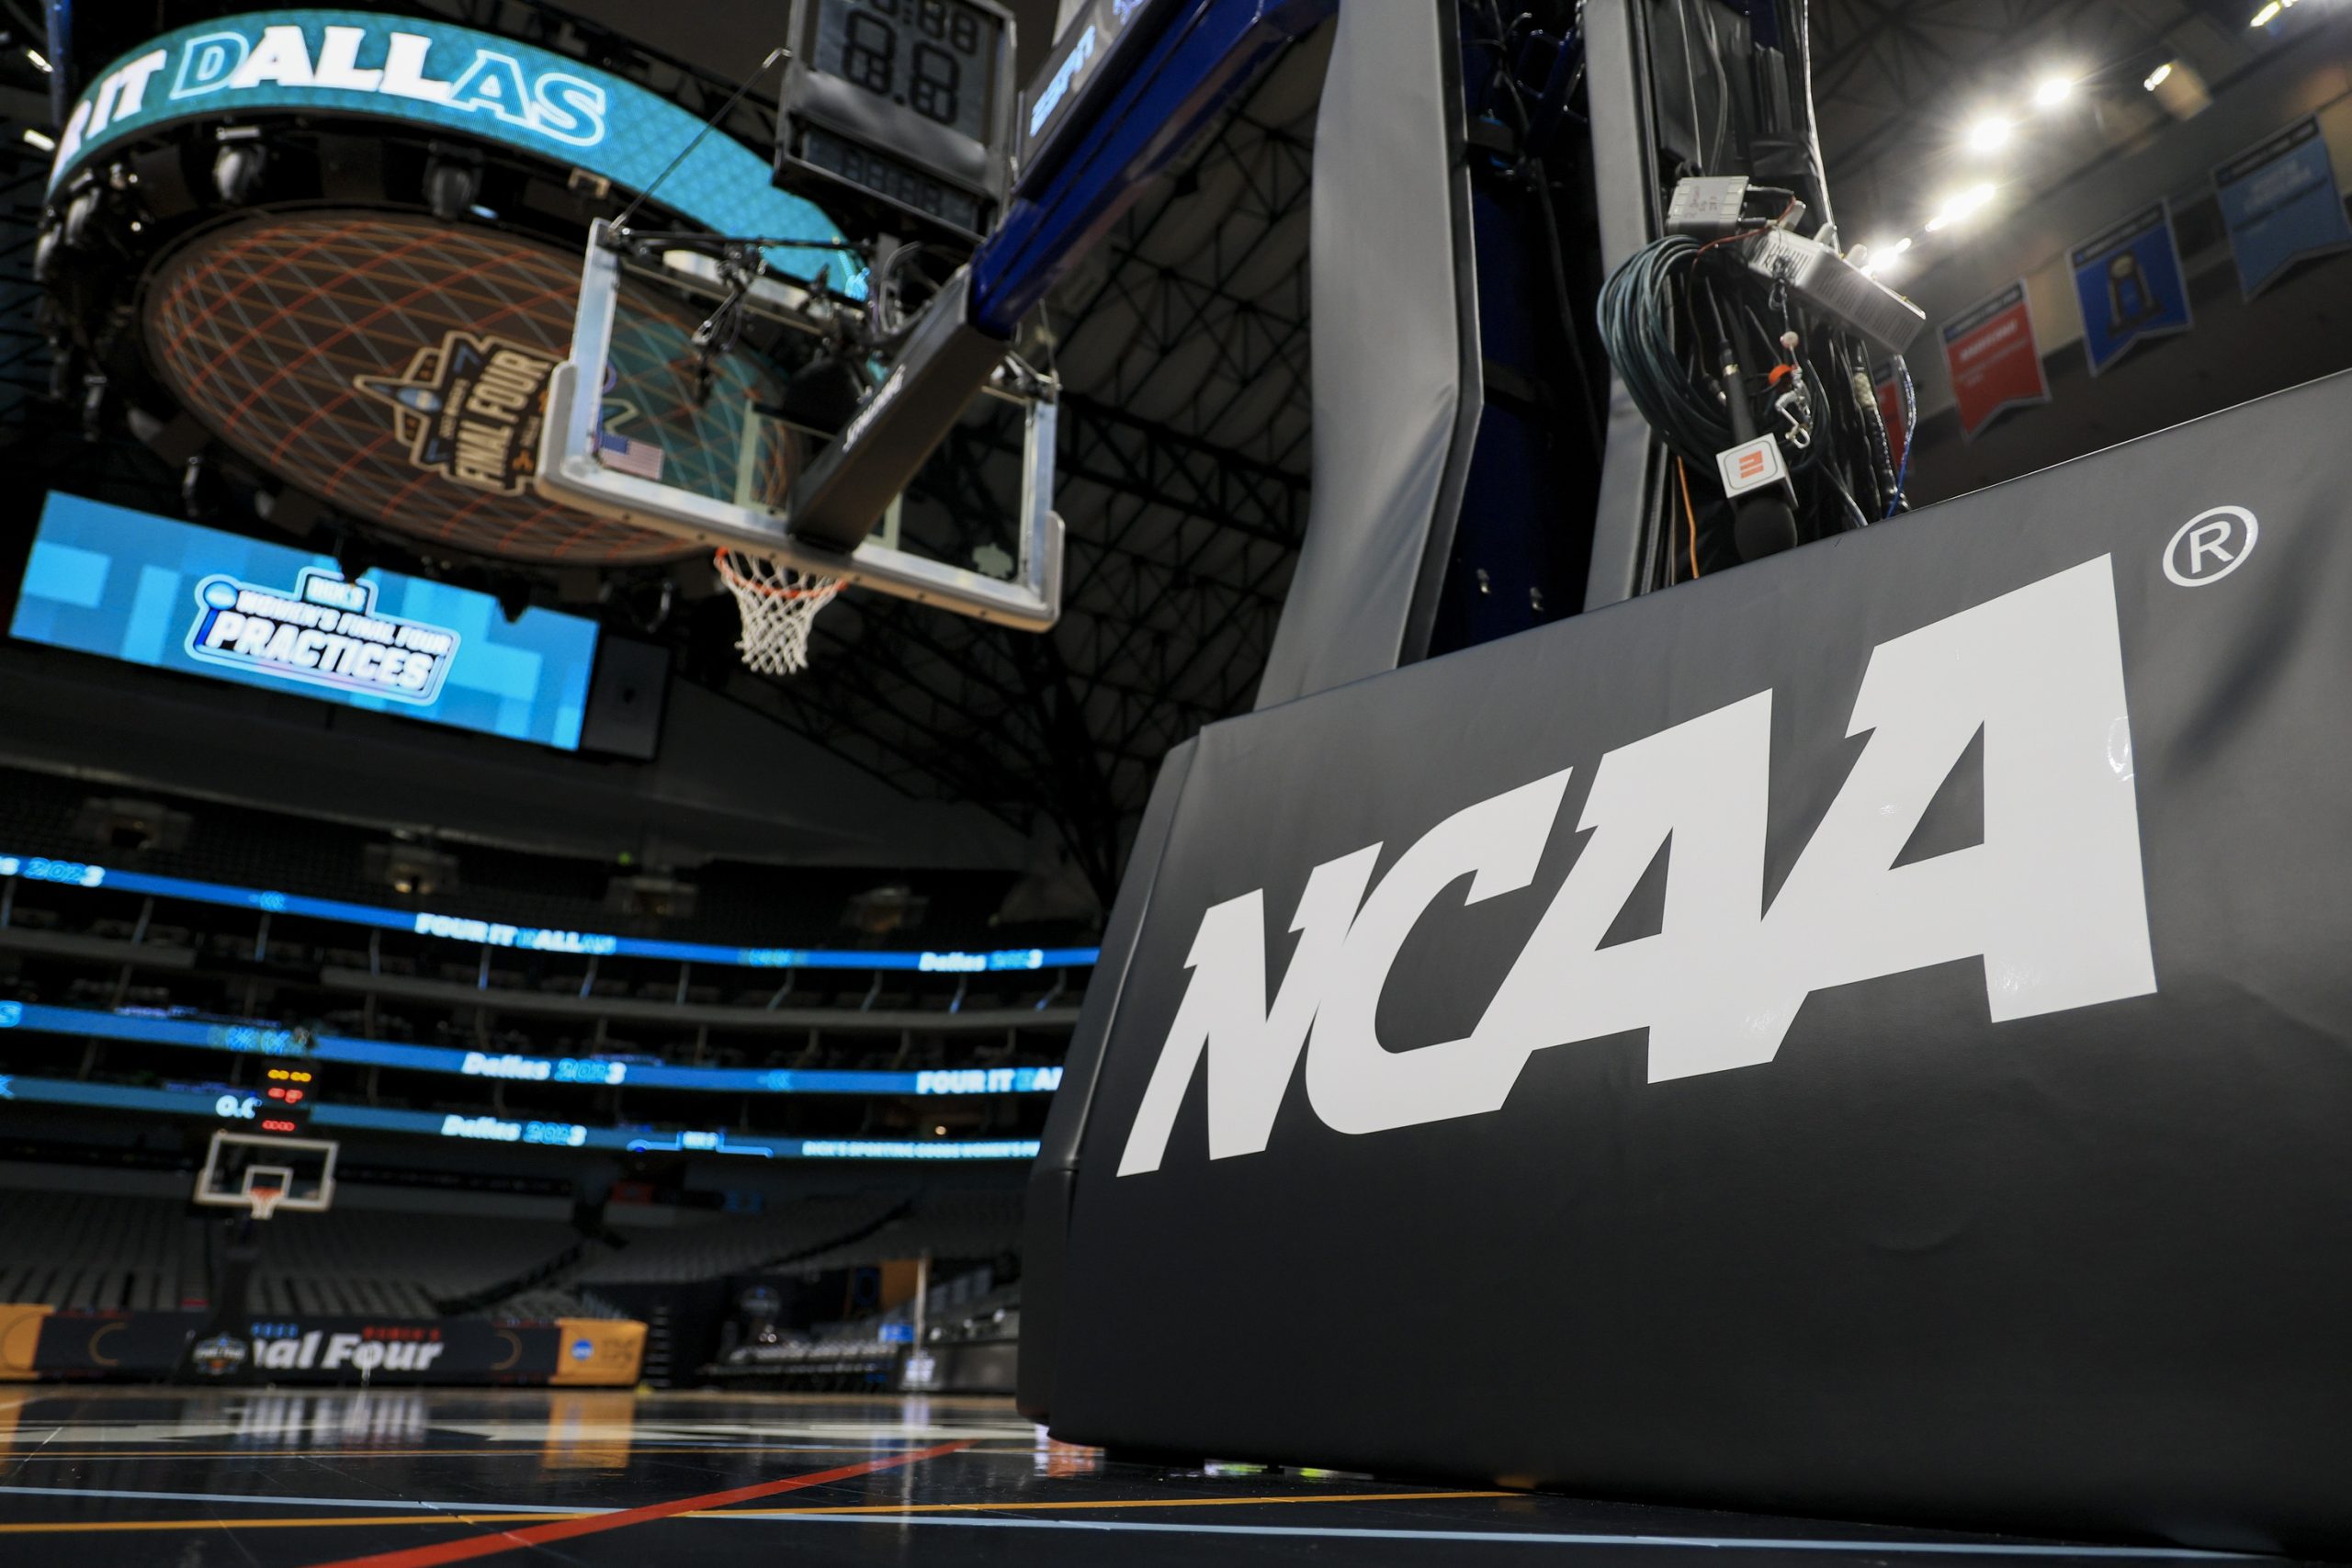 Mar 29, 2023; Dallas, TX, USA; The NCAA logo on the stanchion is seen at the American Airlines Center prior to practice. Mandatory Credit: Aaron Doster-USA TODAY Sports